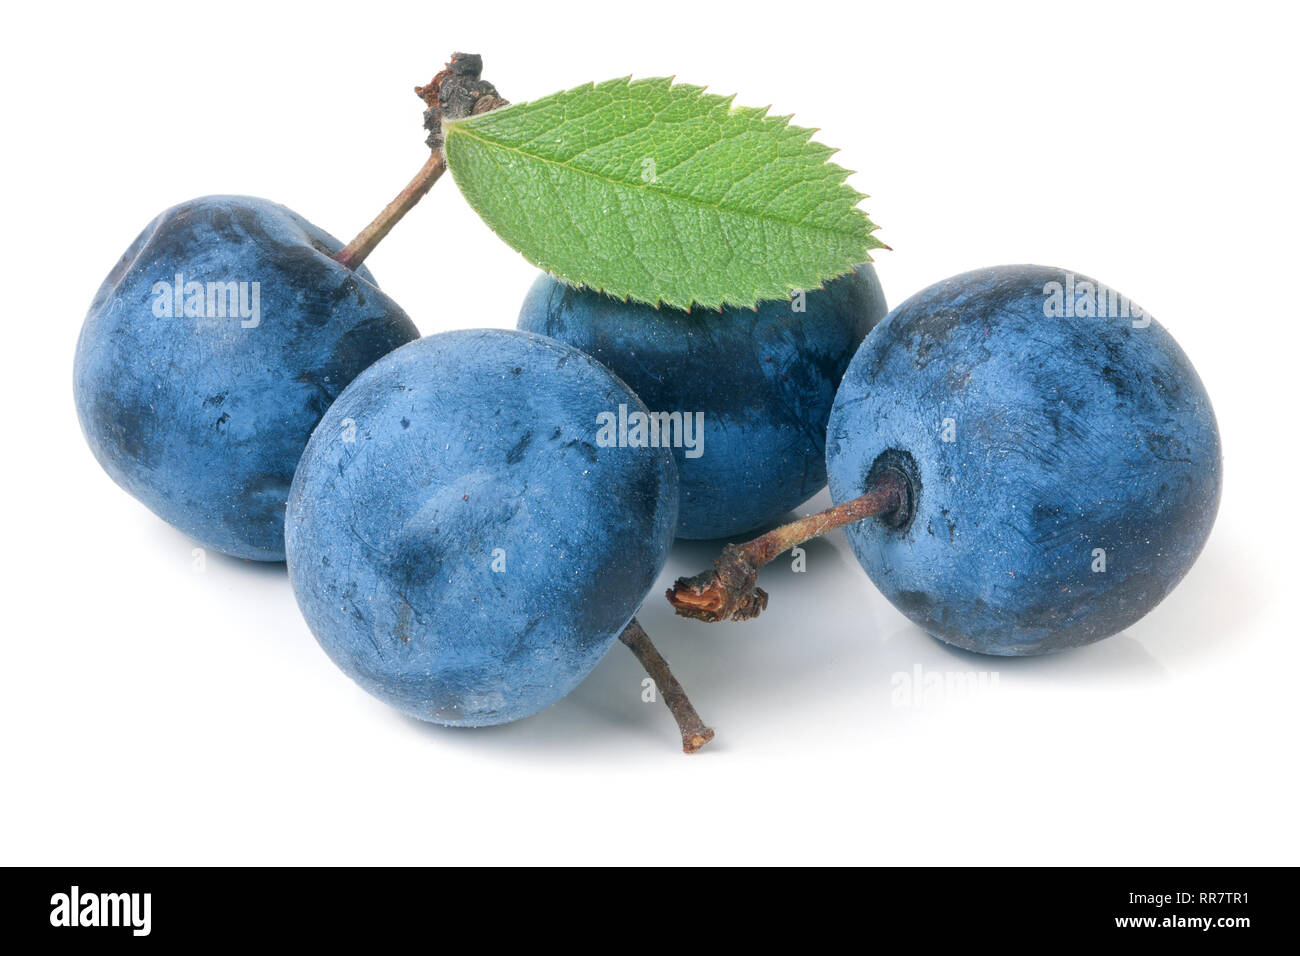 fresh blackthorn berries with leaves isolated on white background Stock Photo